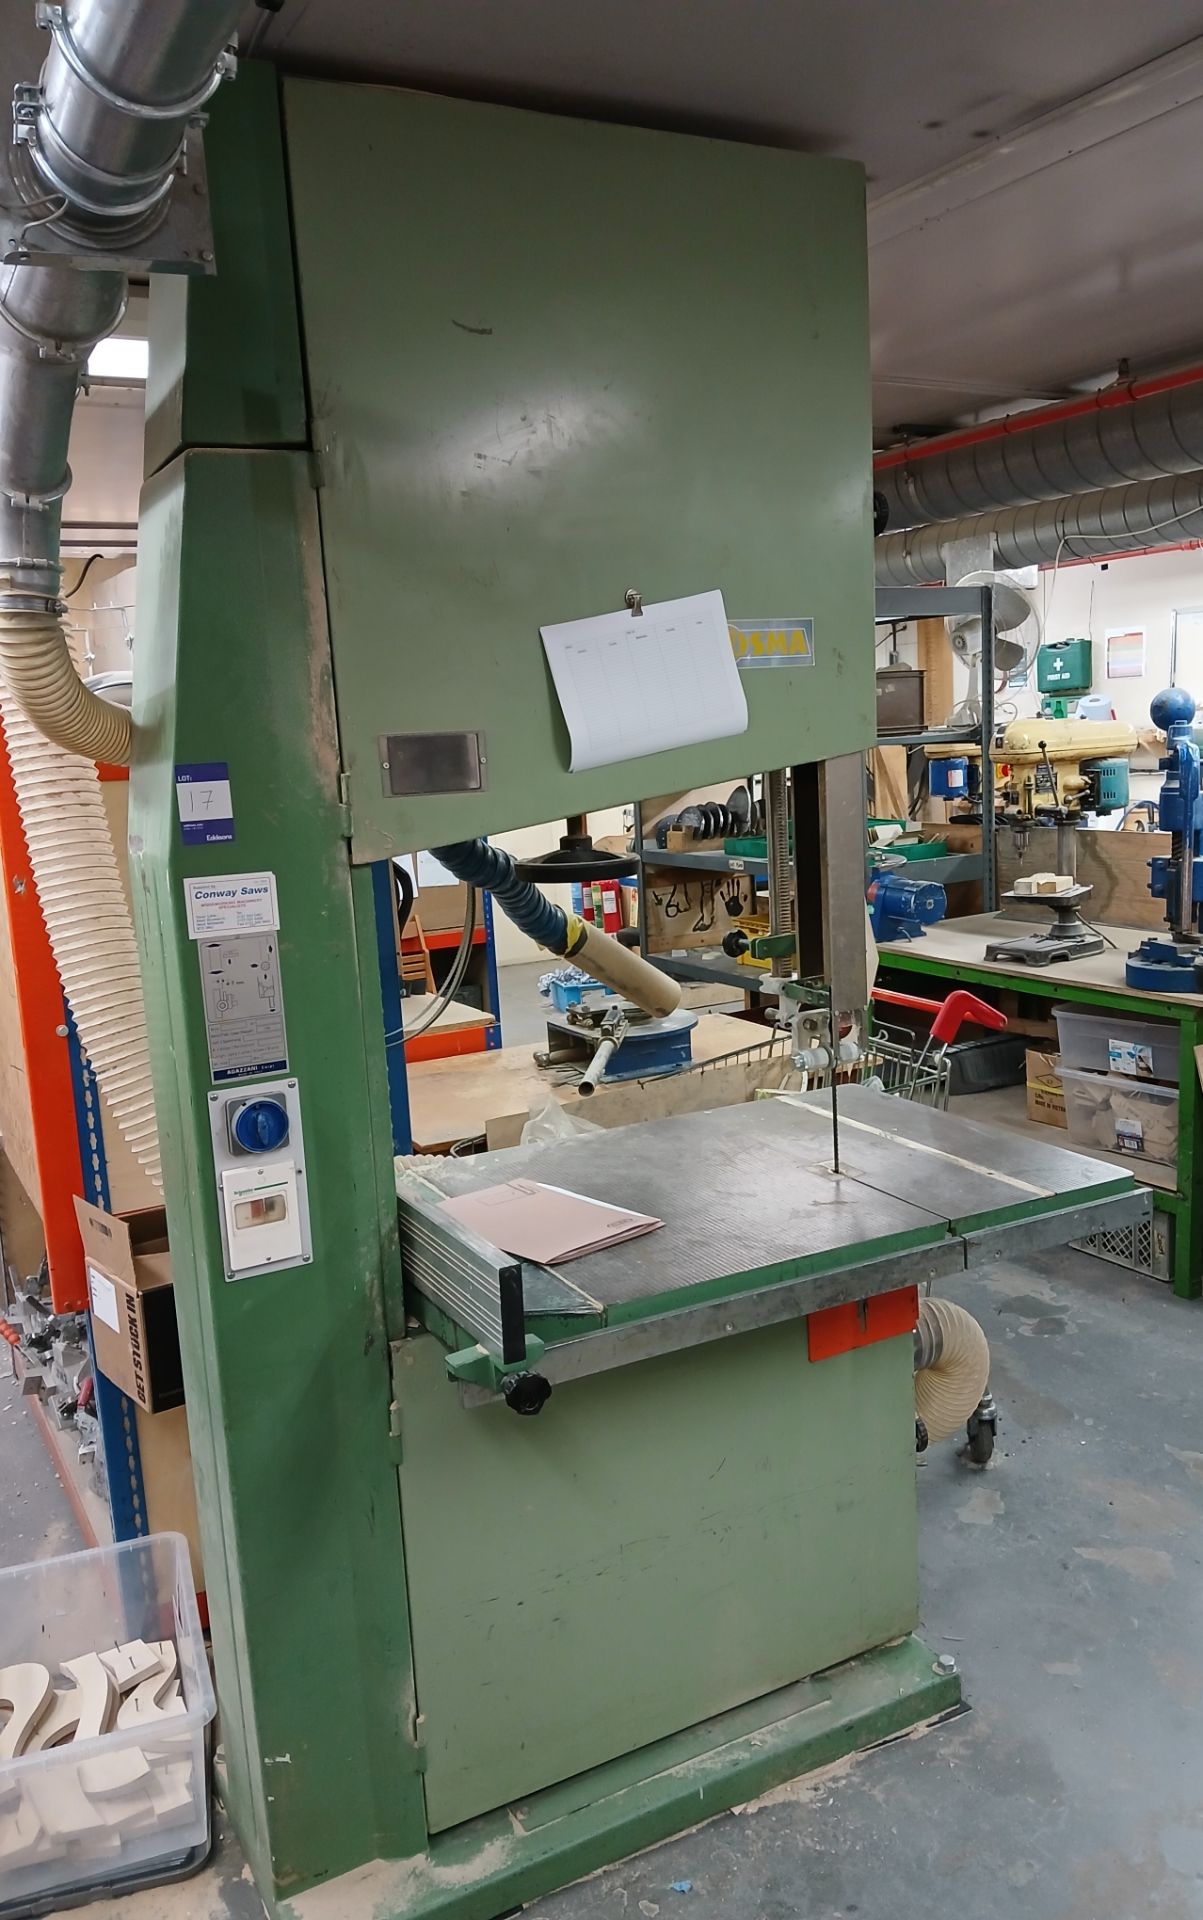 Osma model 800 bandsaw Serial number 01048 (1993) C.75cm throat – Ducting excluded, A Risk